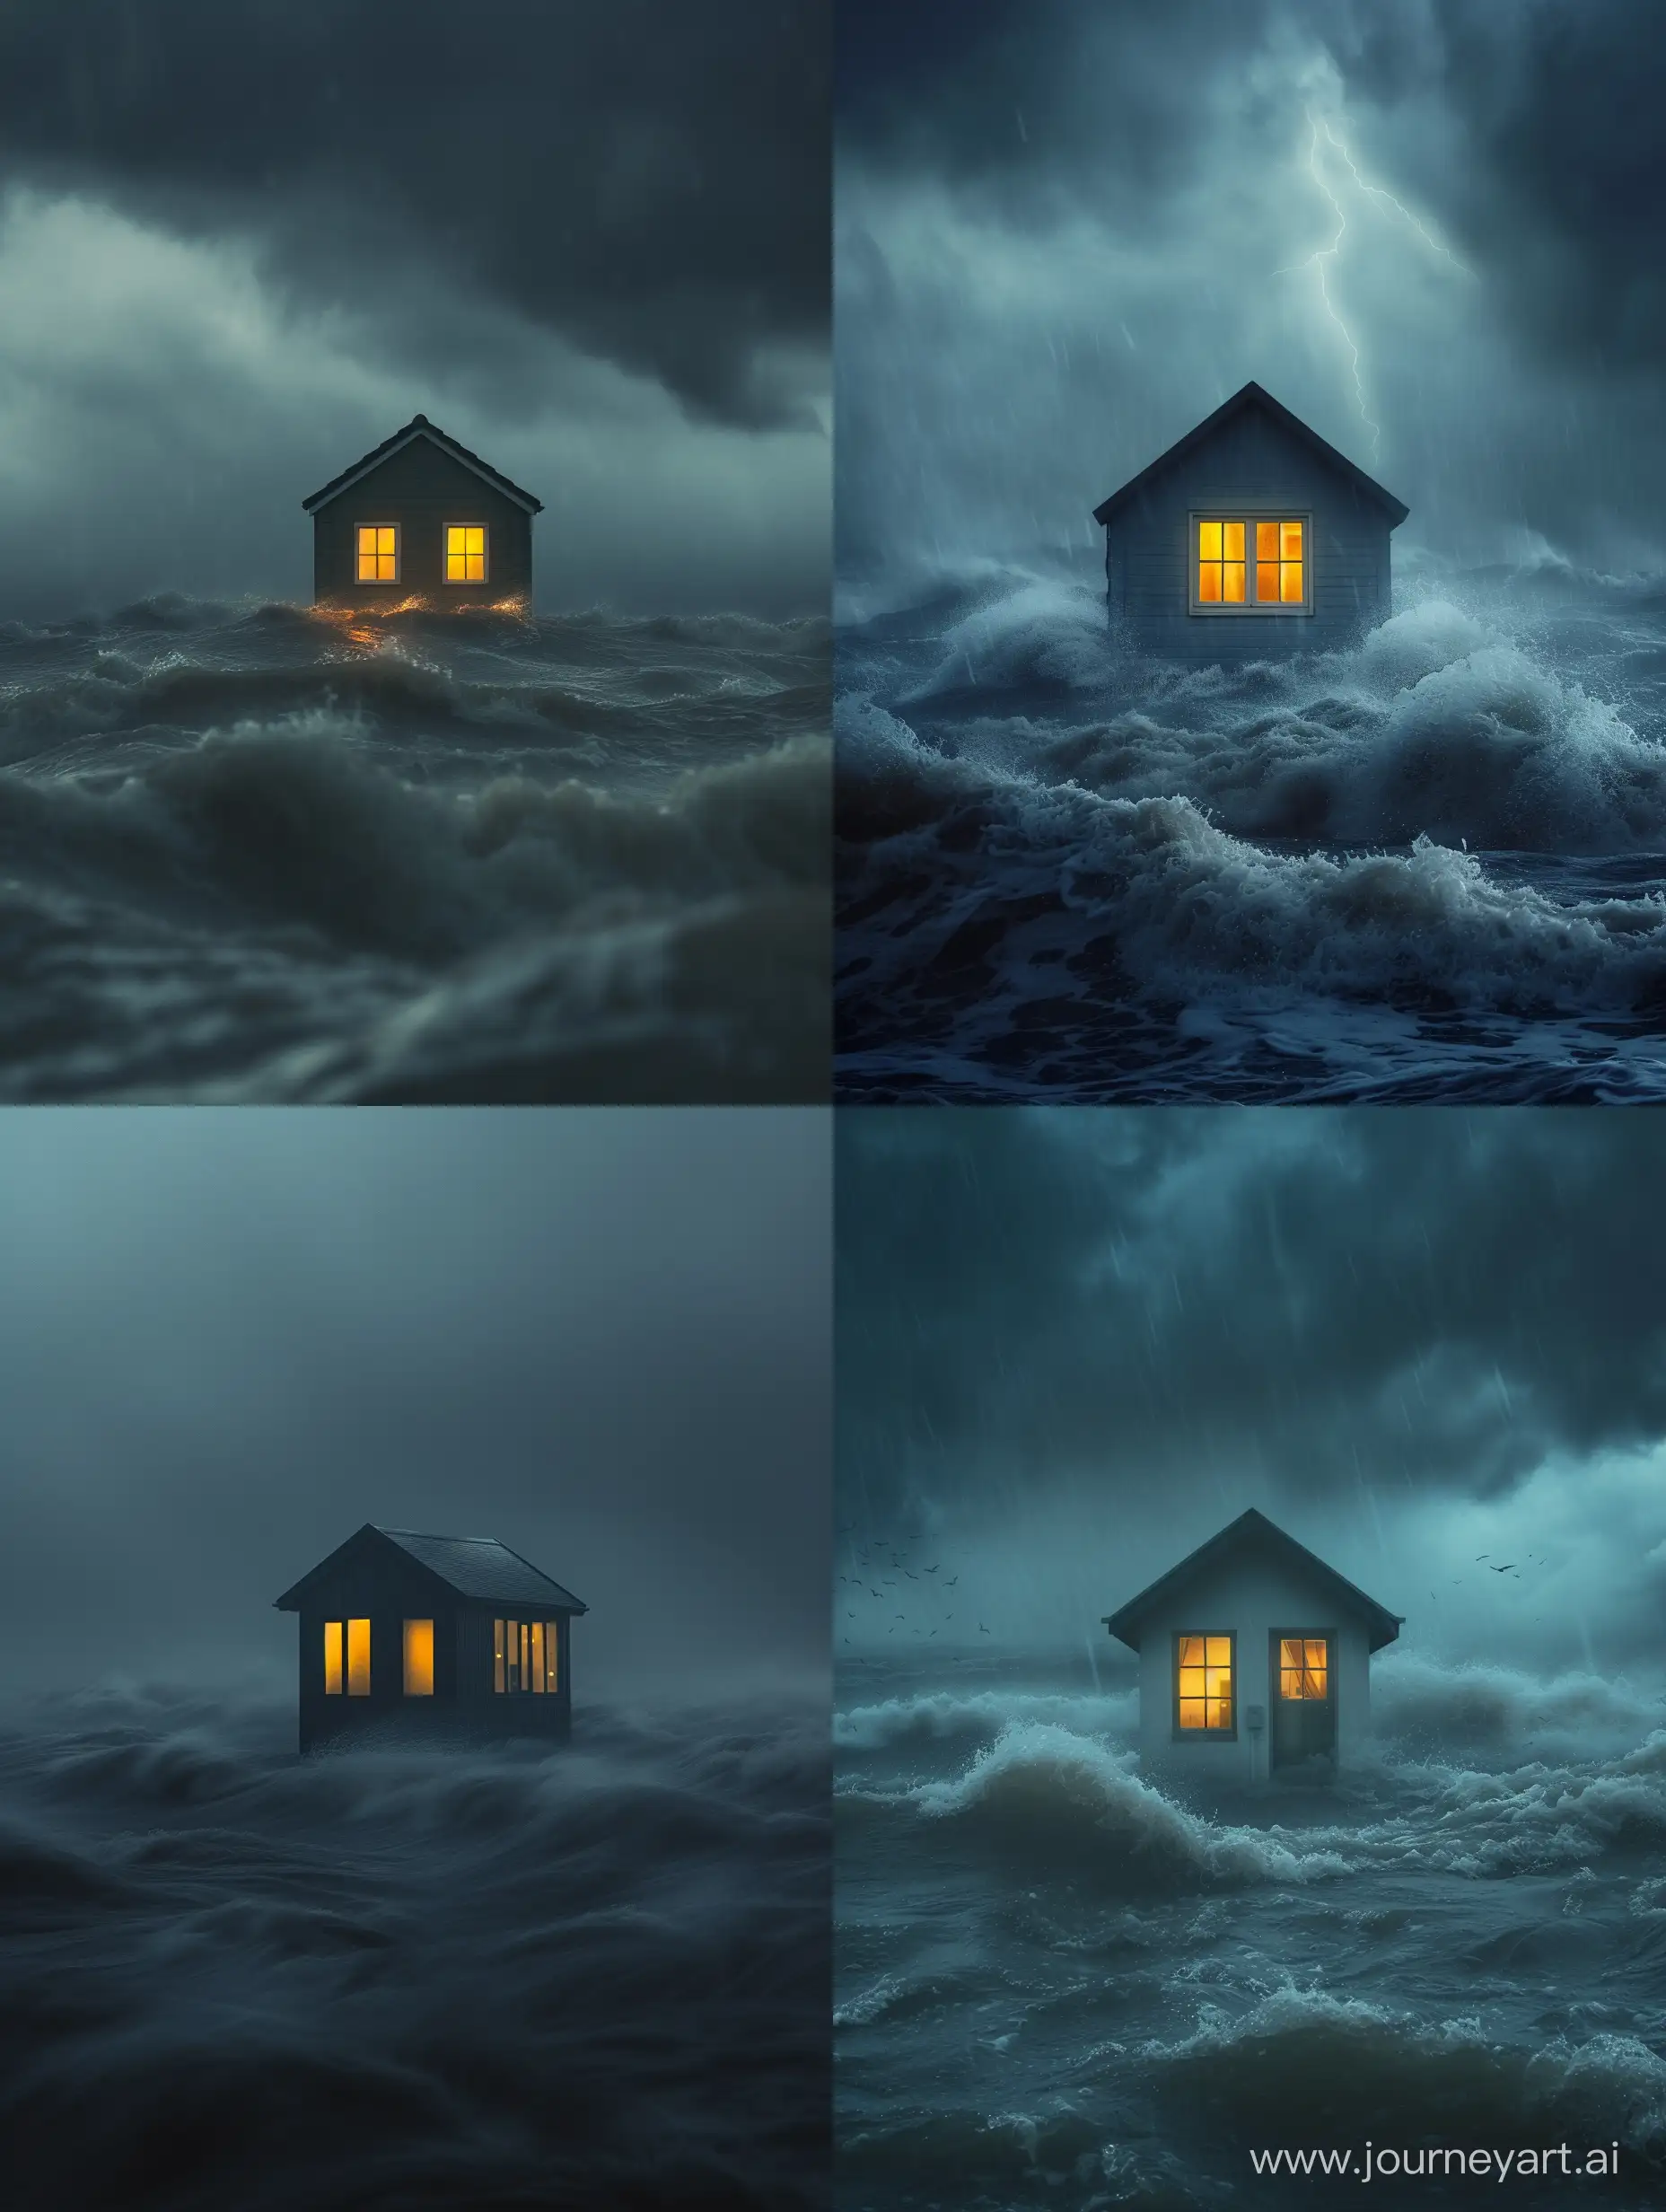 The small double-glazed house stood alone in the middle of the storm. There was a warm yellow light in the windows, it illuminated the storm and darkness surrounding us